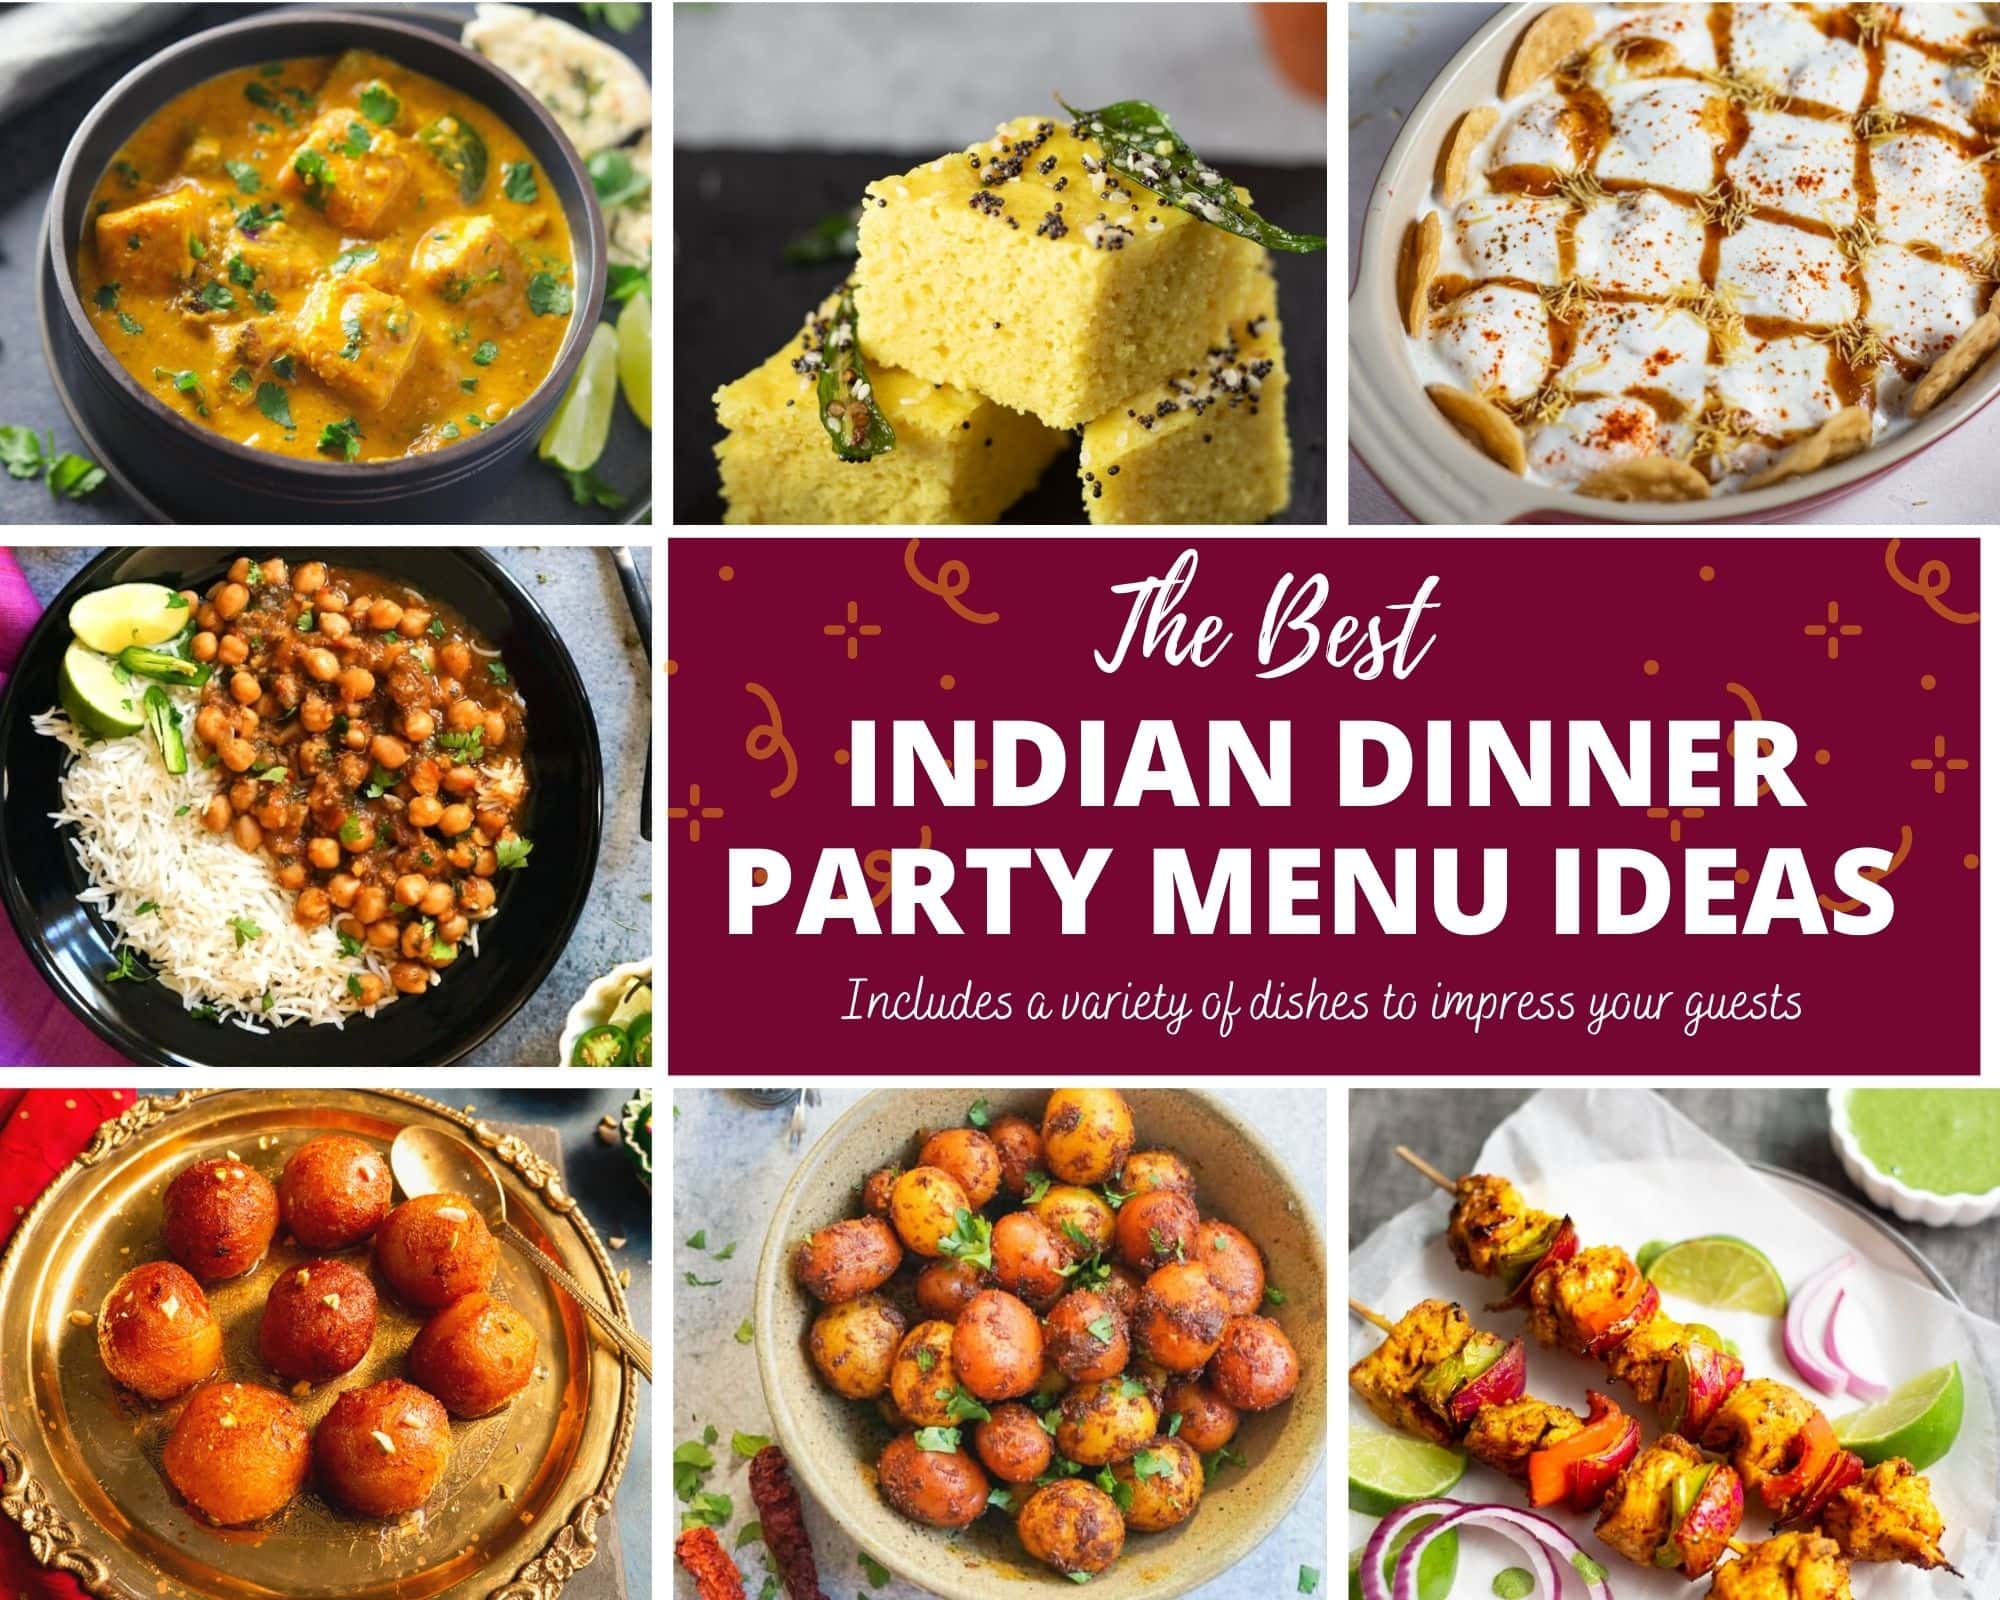 Indian Dinner Party Menu Ideas - Piping Pot Curry